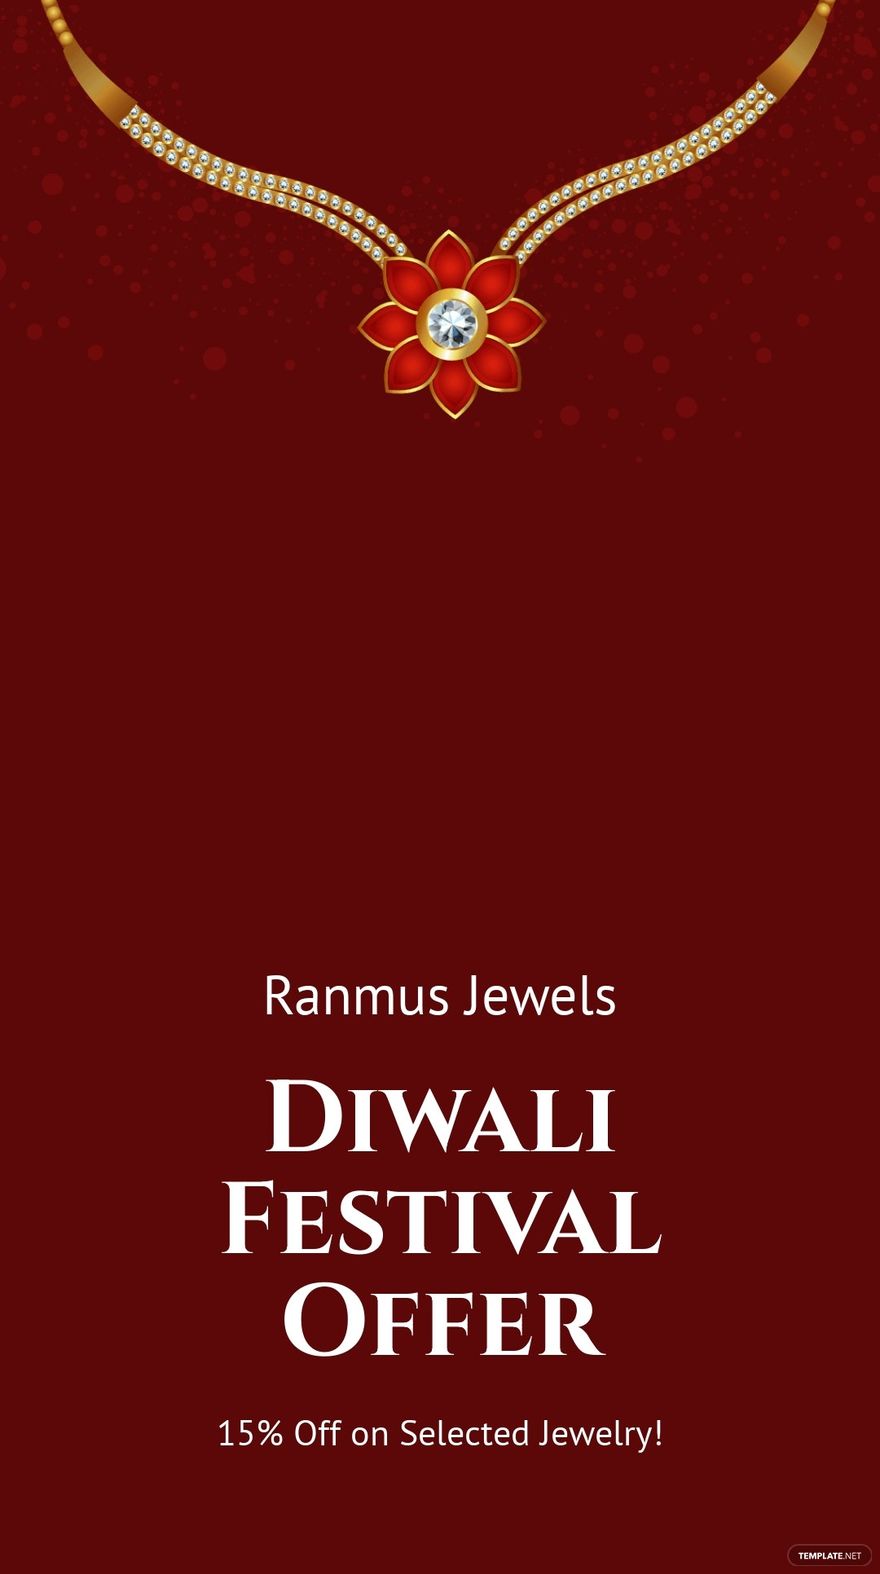 Free Diwali Festival Offer Snapchat Geofilter Template